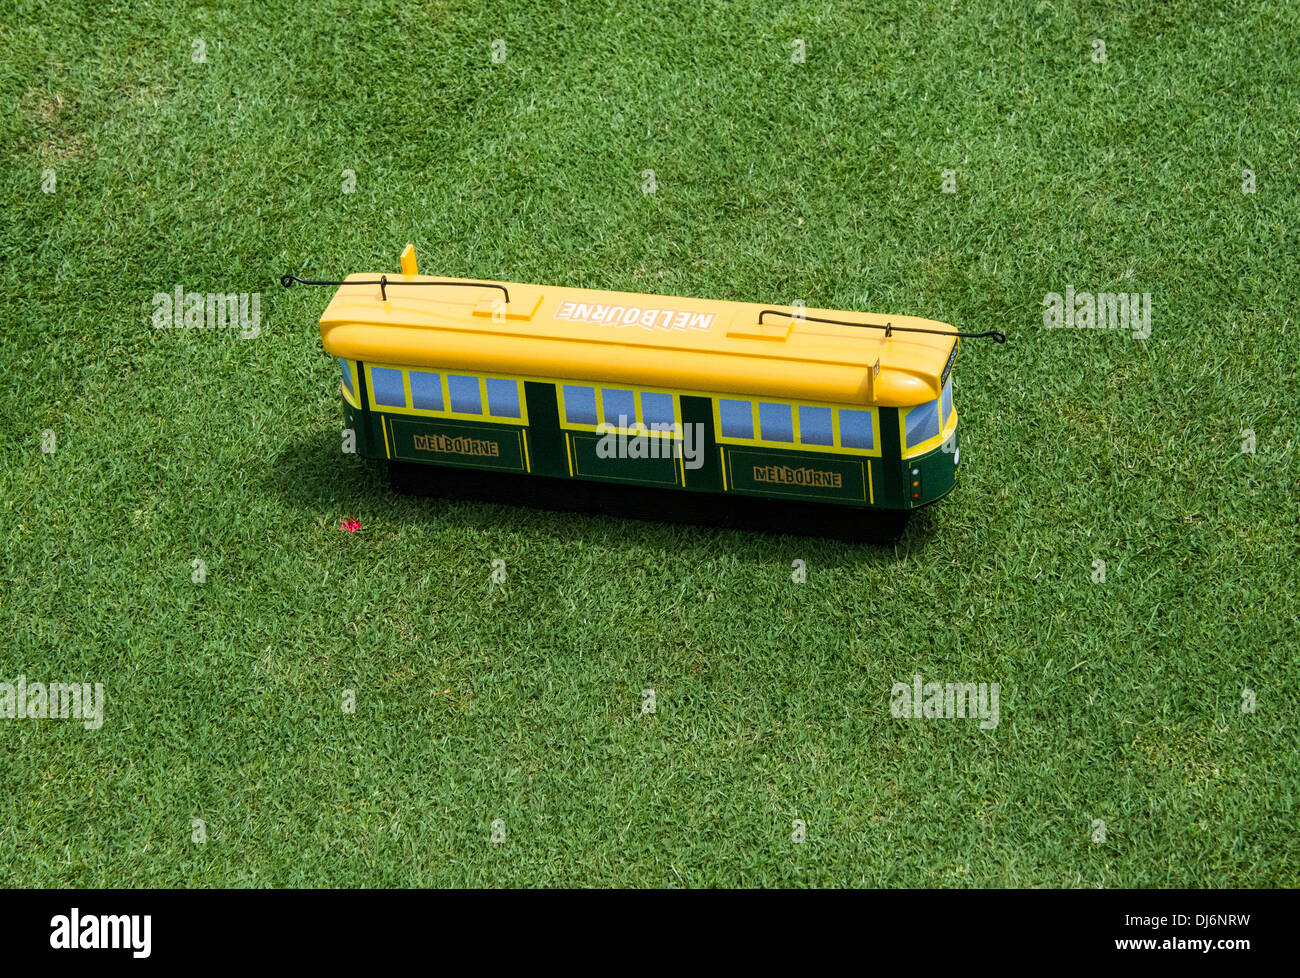 Melbourne tram tee marker at Royal Melbourne golf club in the Handa World Cup Stock Photo